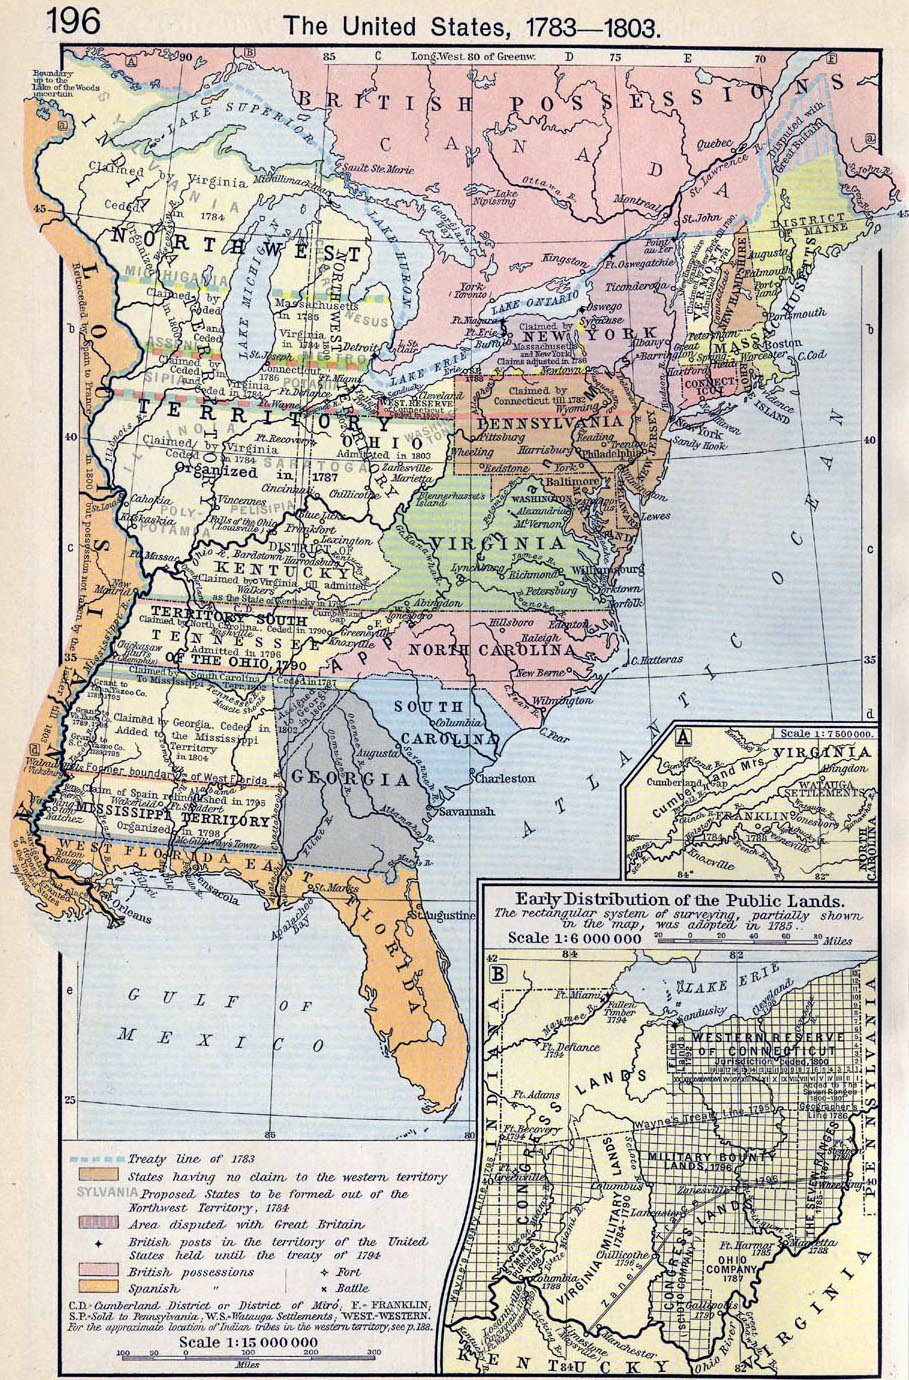 Map of the United States 1783-1803